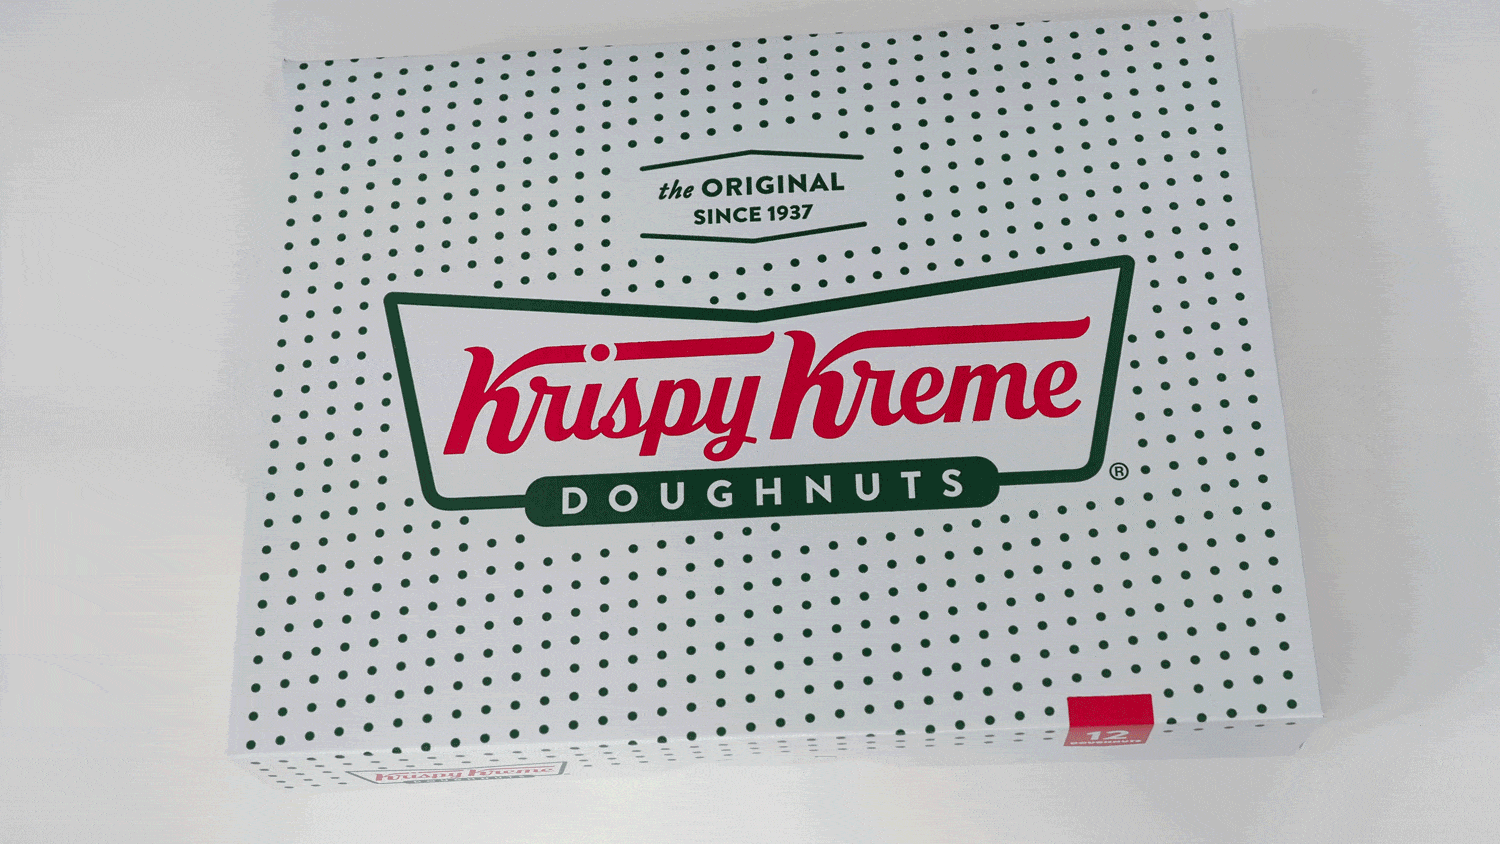 A GIF shows a box of Krispy Kreme donuts being opened and closed.